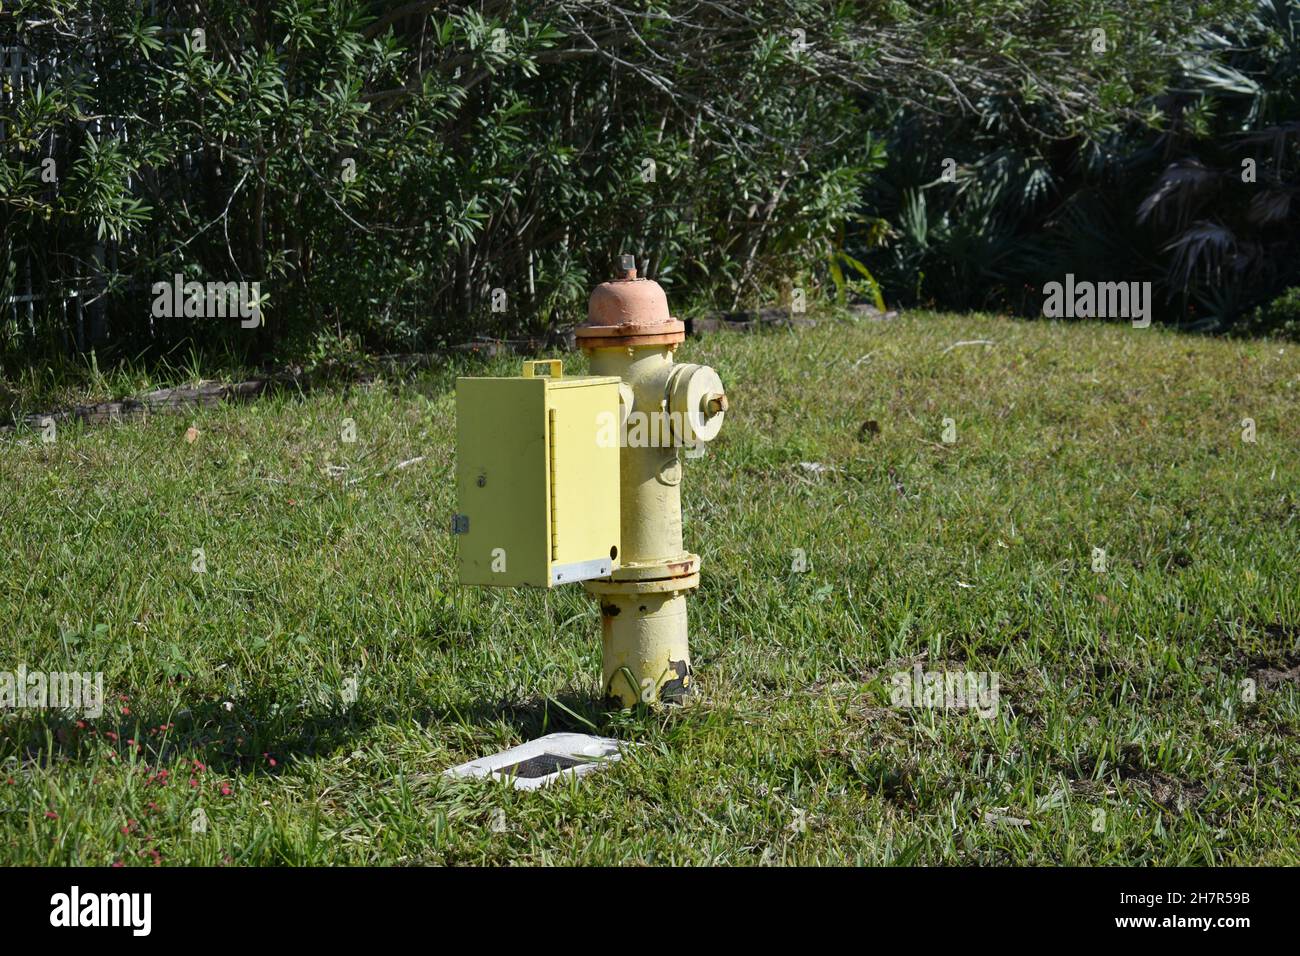 Angled view of yellow box attached to an old fire hydrant. Stock Photo